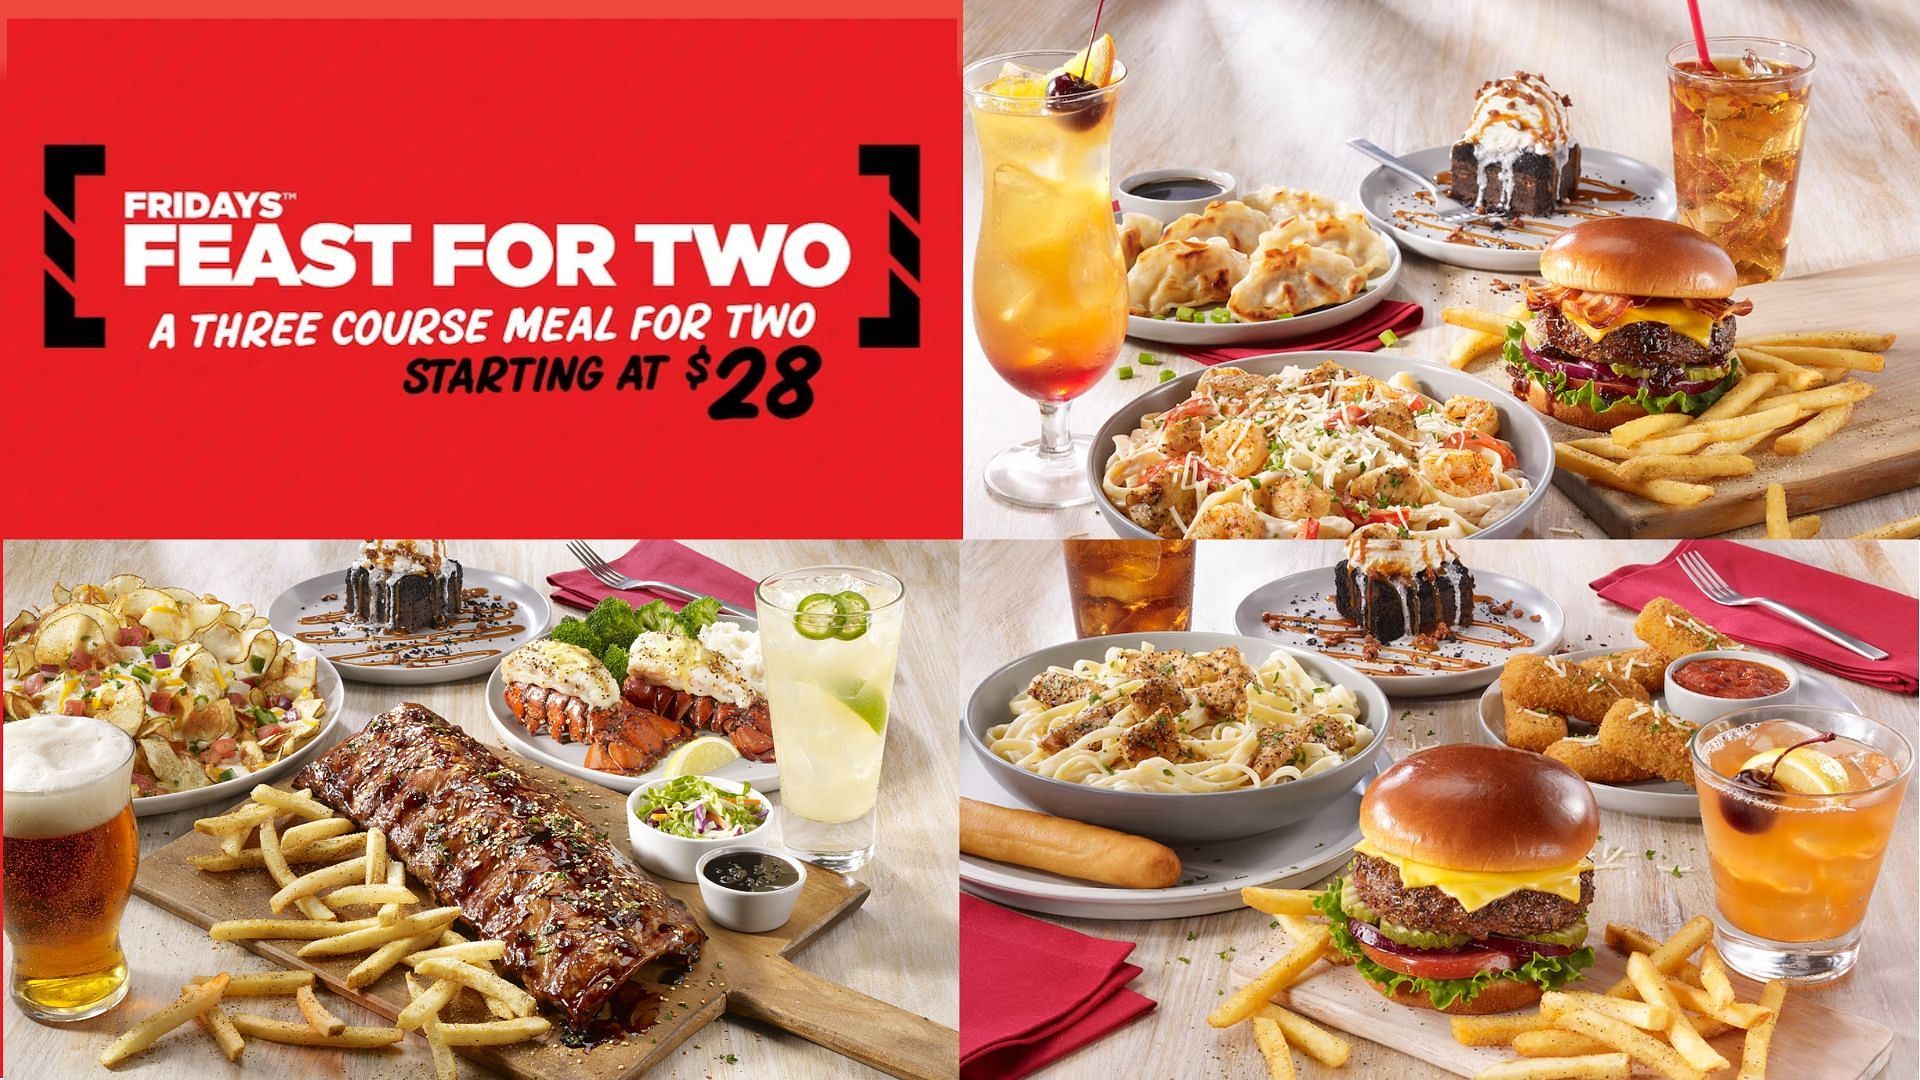 The Limited Time Feast for Two menu is only available for dine-in orders (Image via TGI Fridays)